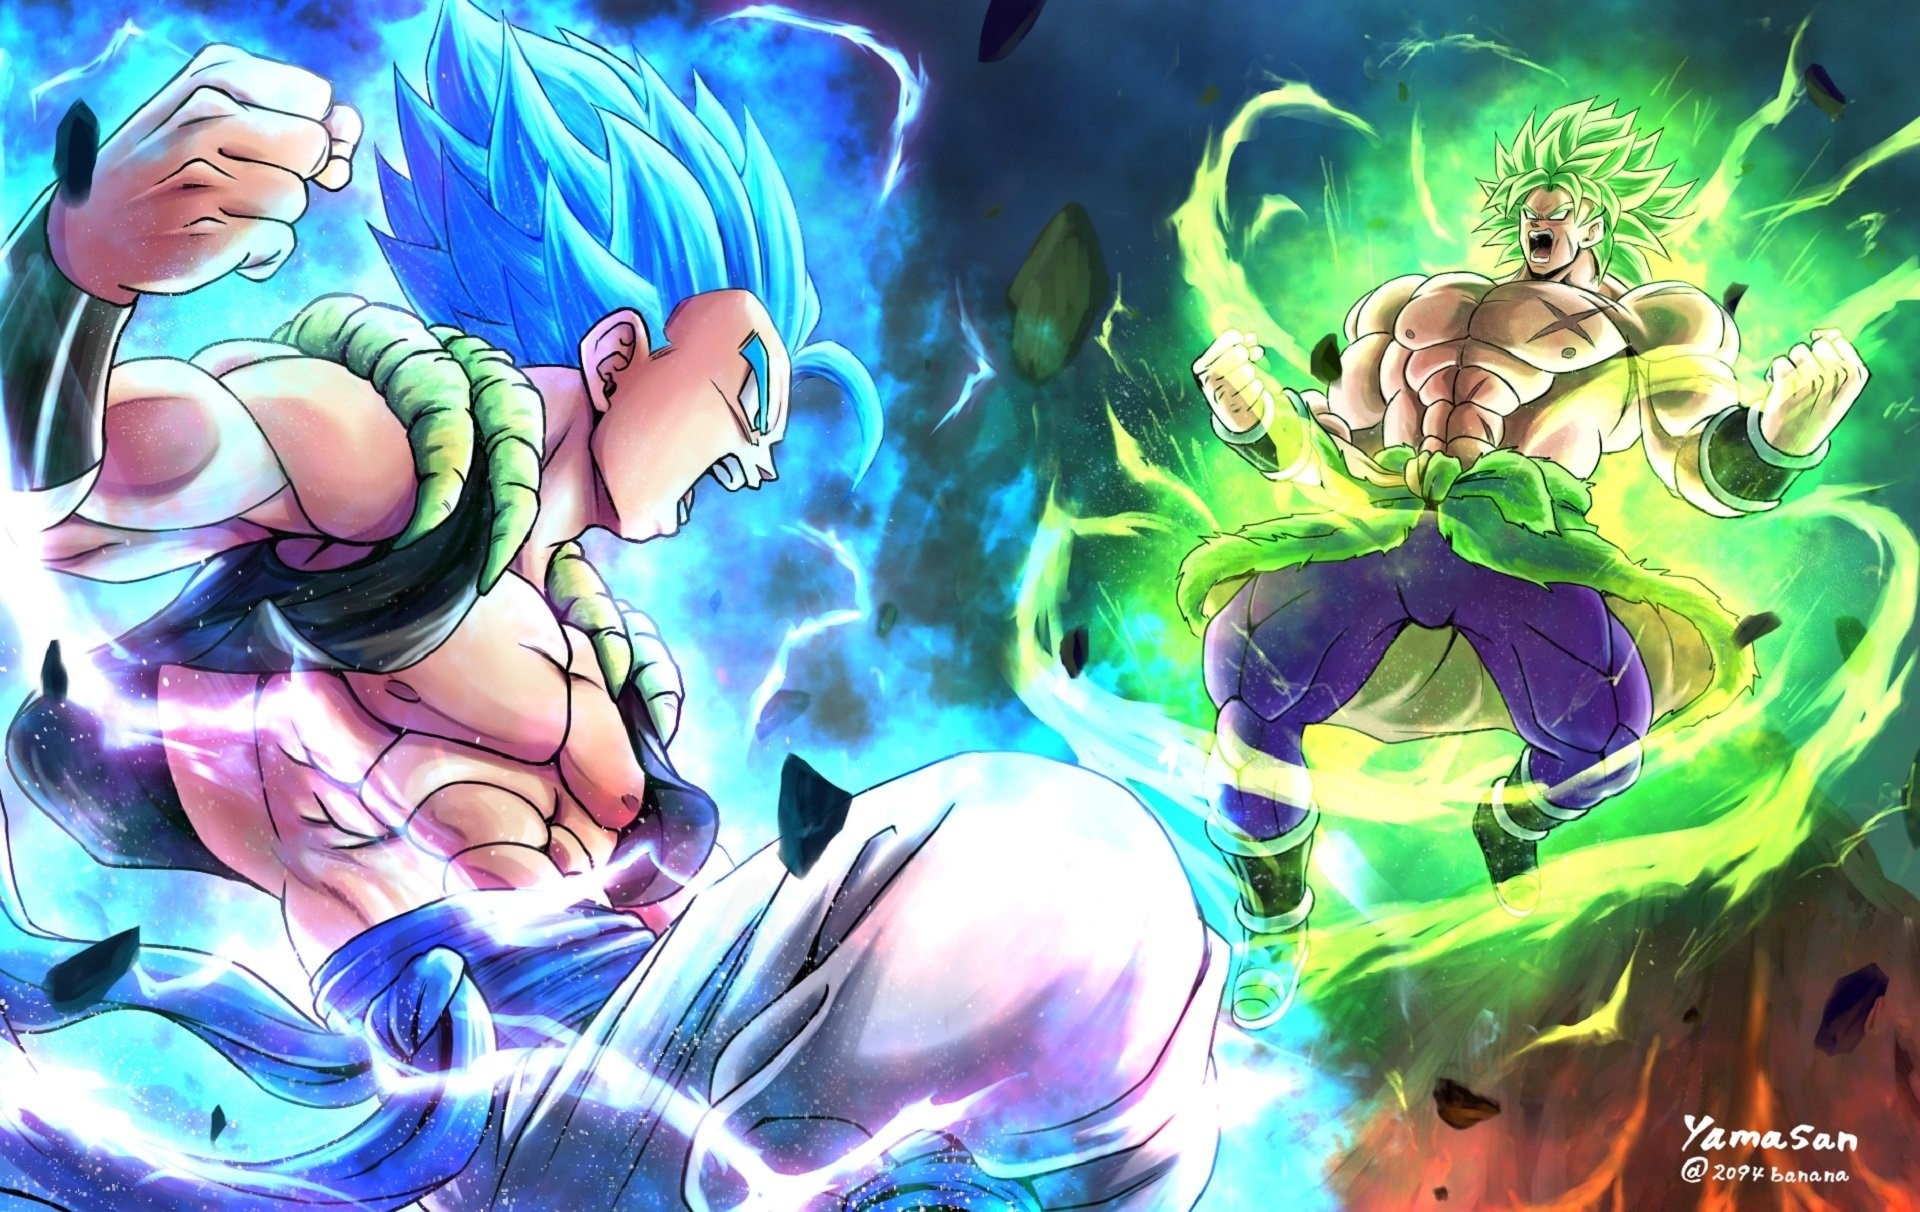 DragonBall wallpaper 4k hd APK for Android Download